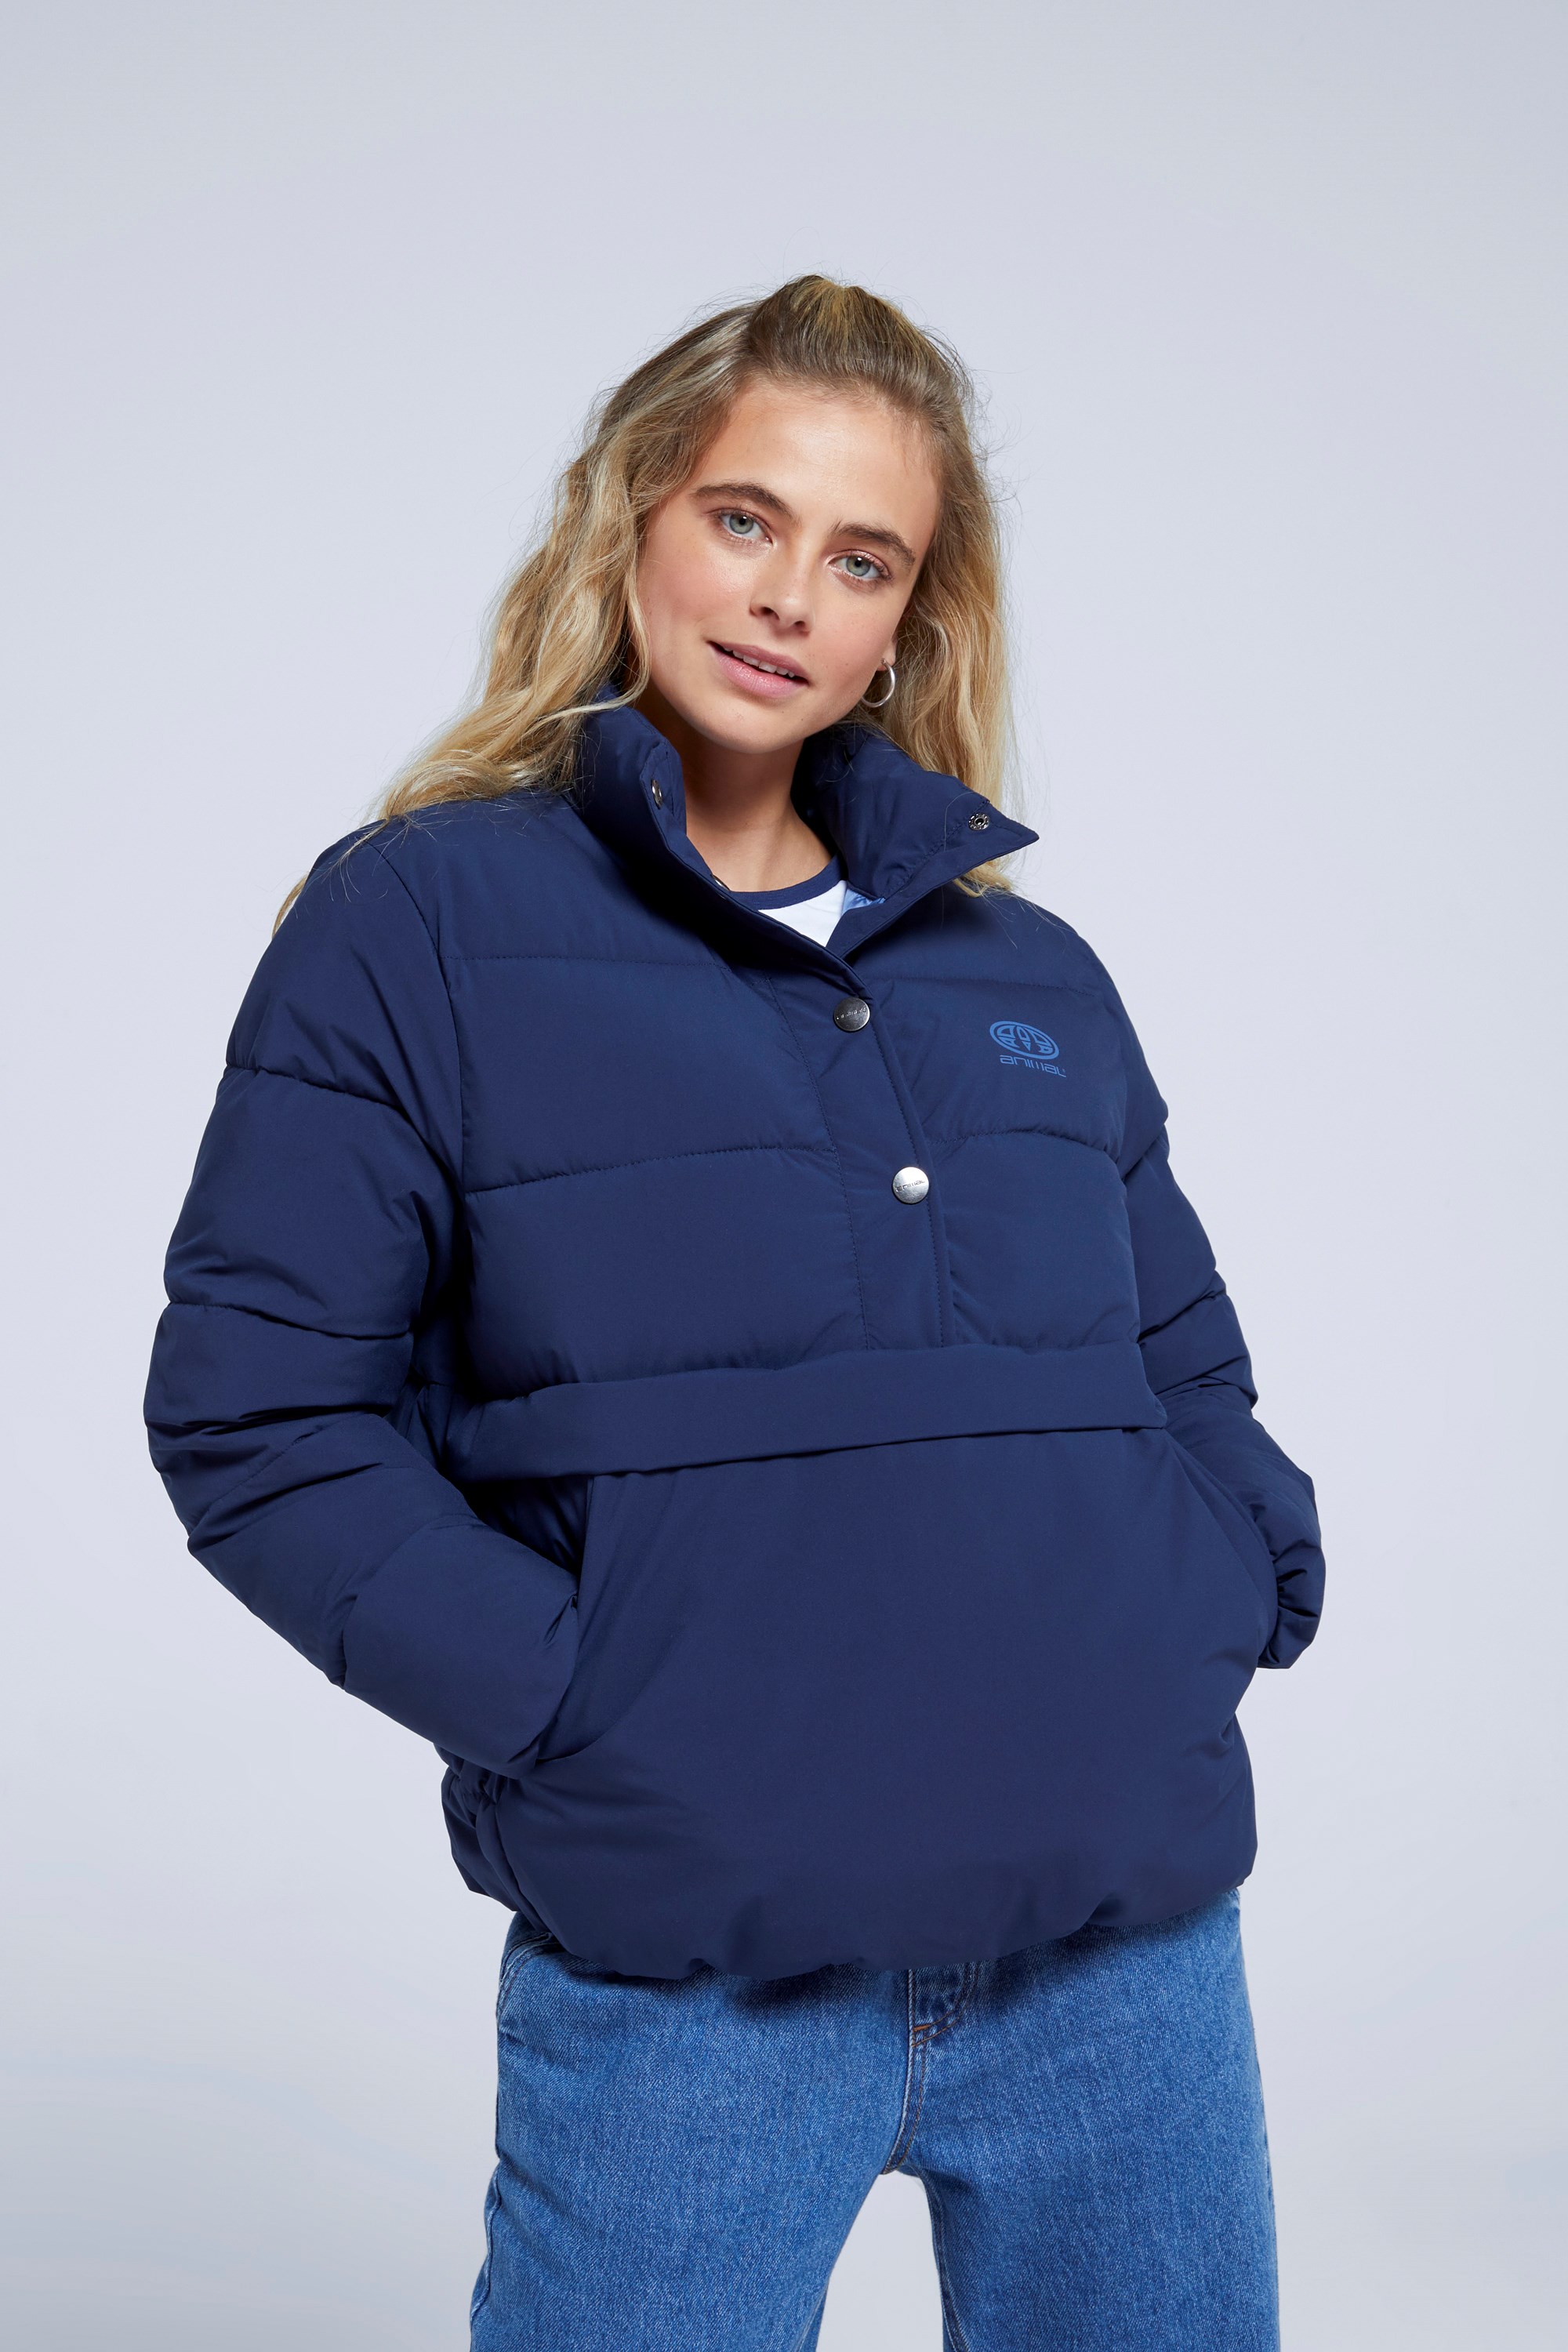 Westbay Womens Recycled Jacket - Navy